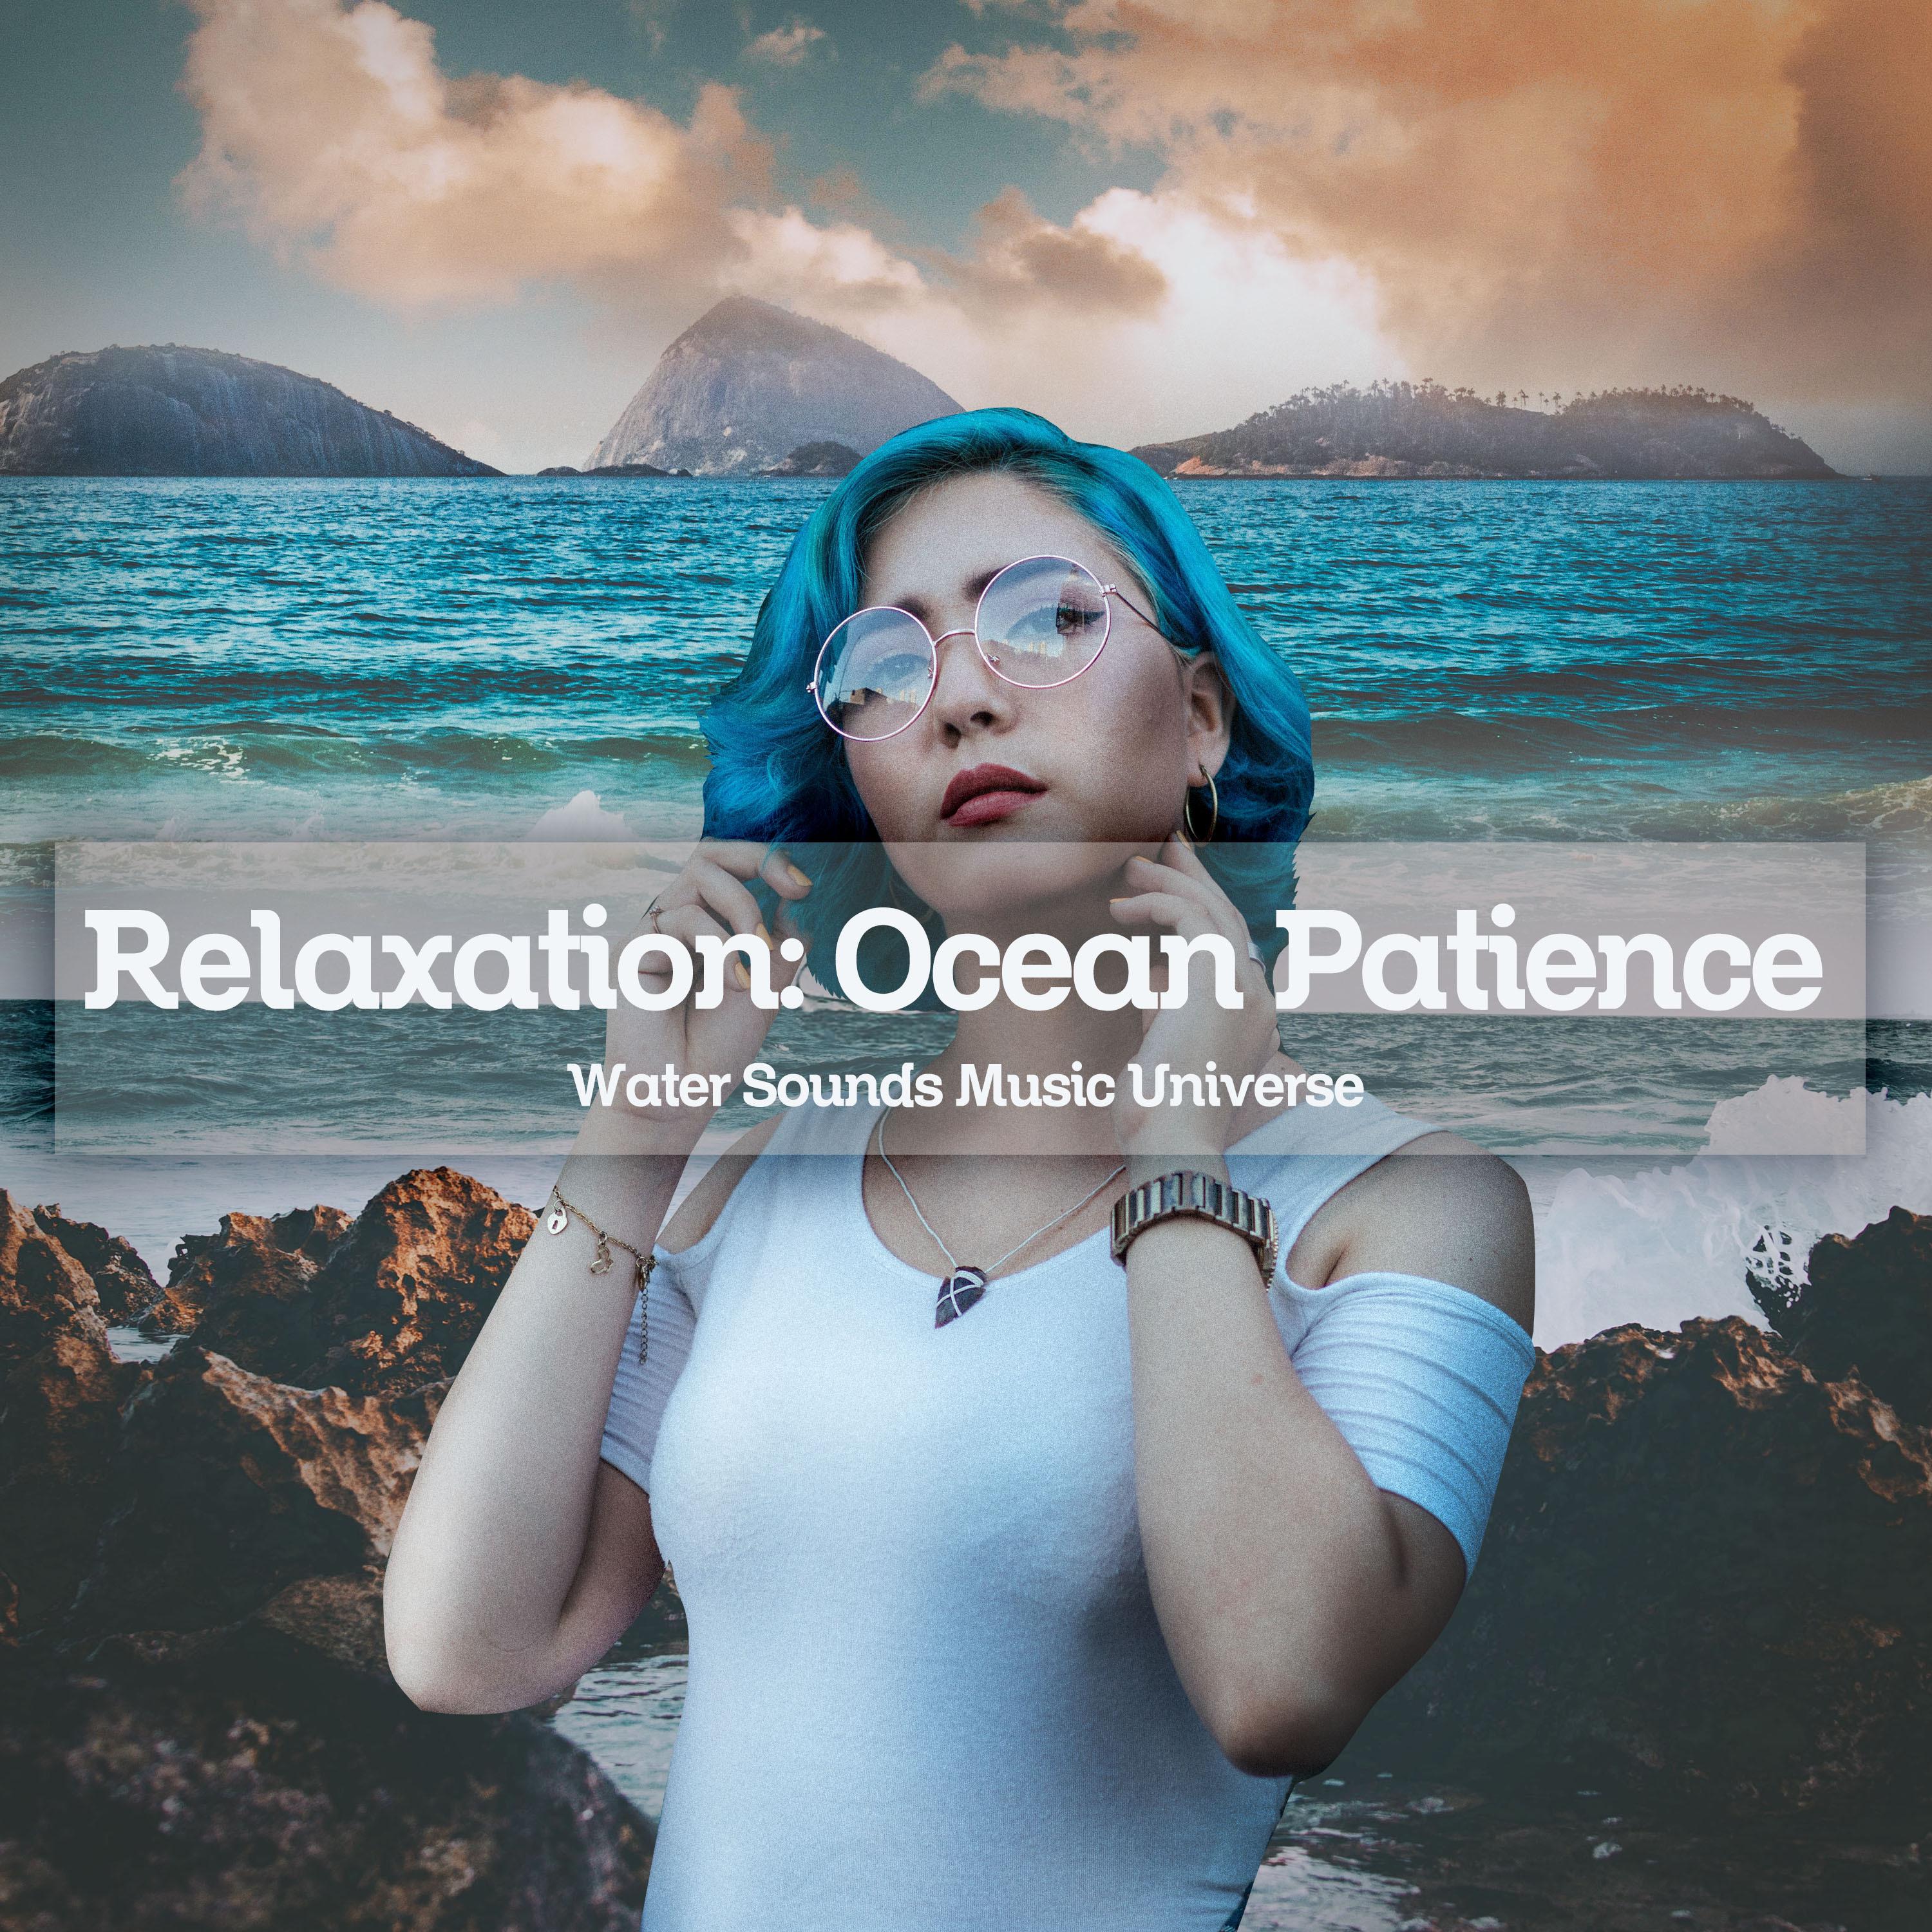 Relaxation: Ocean Patience